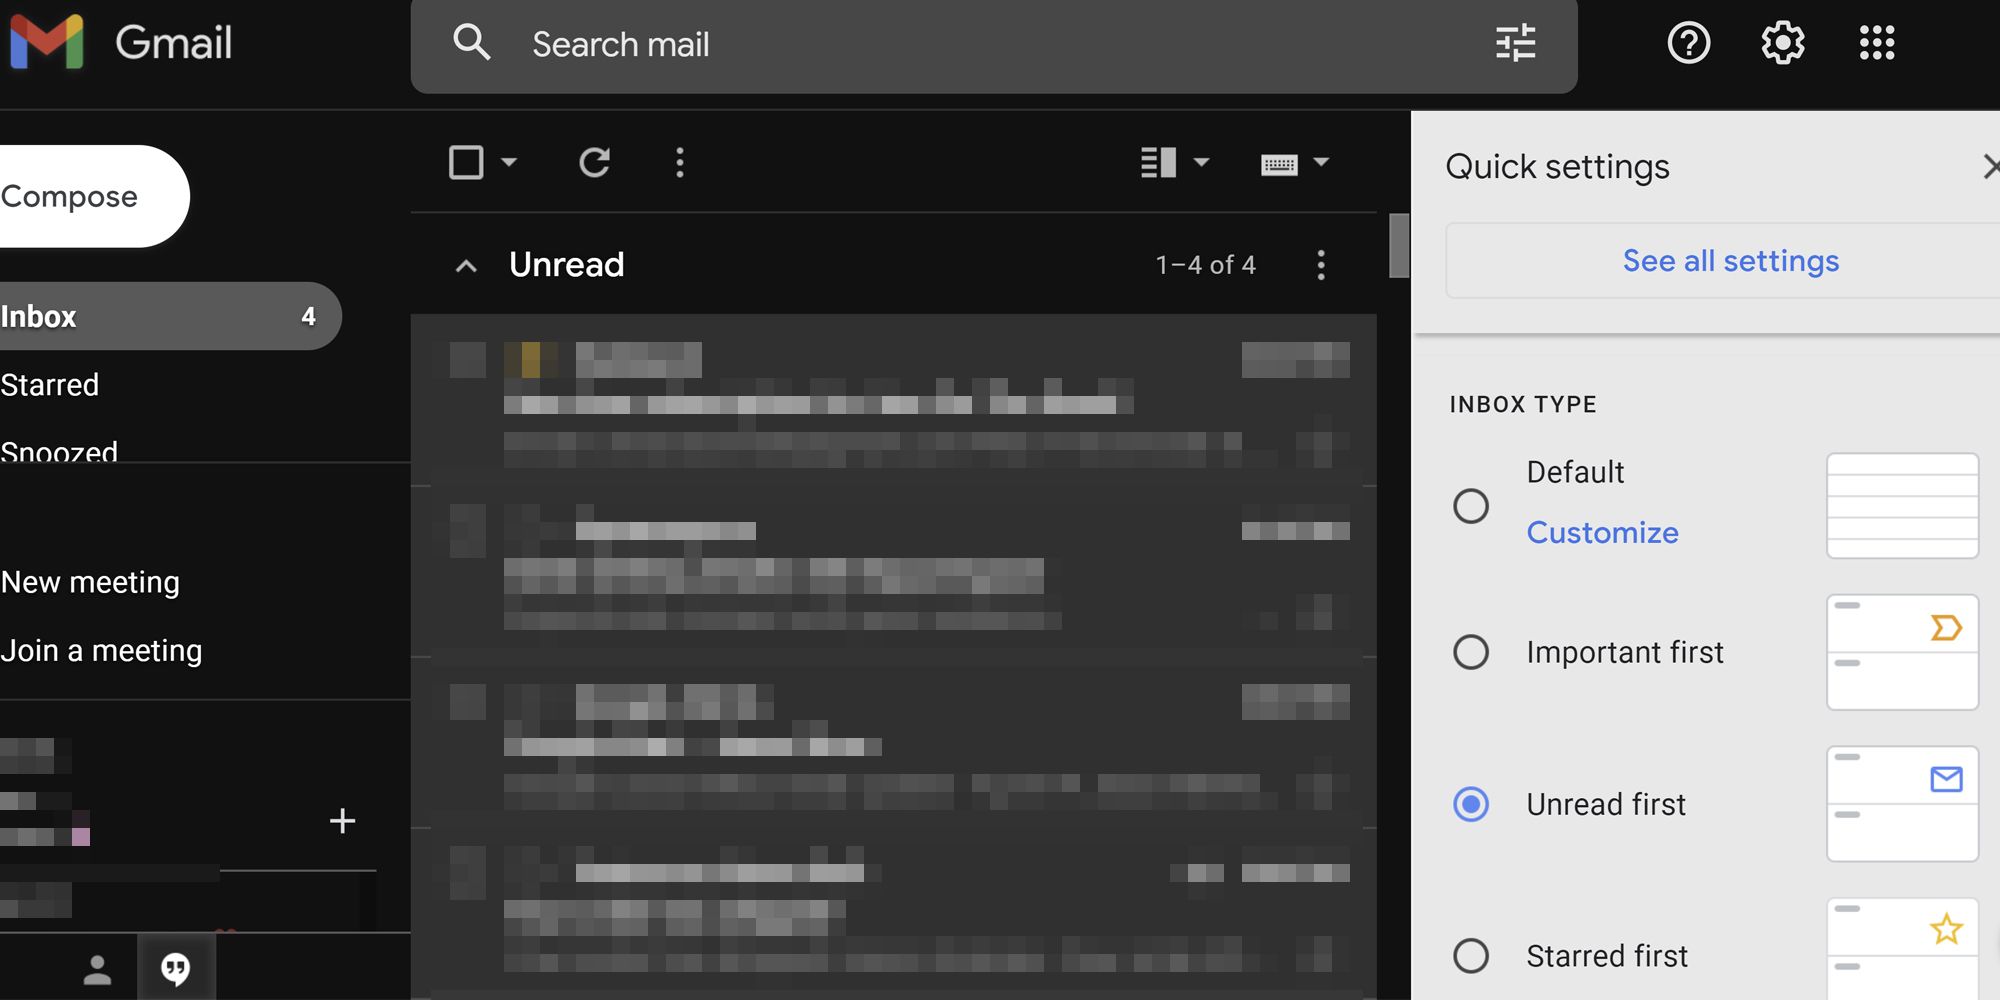 How To Change Gmail’s Inbox Layout